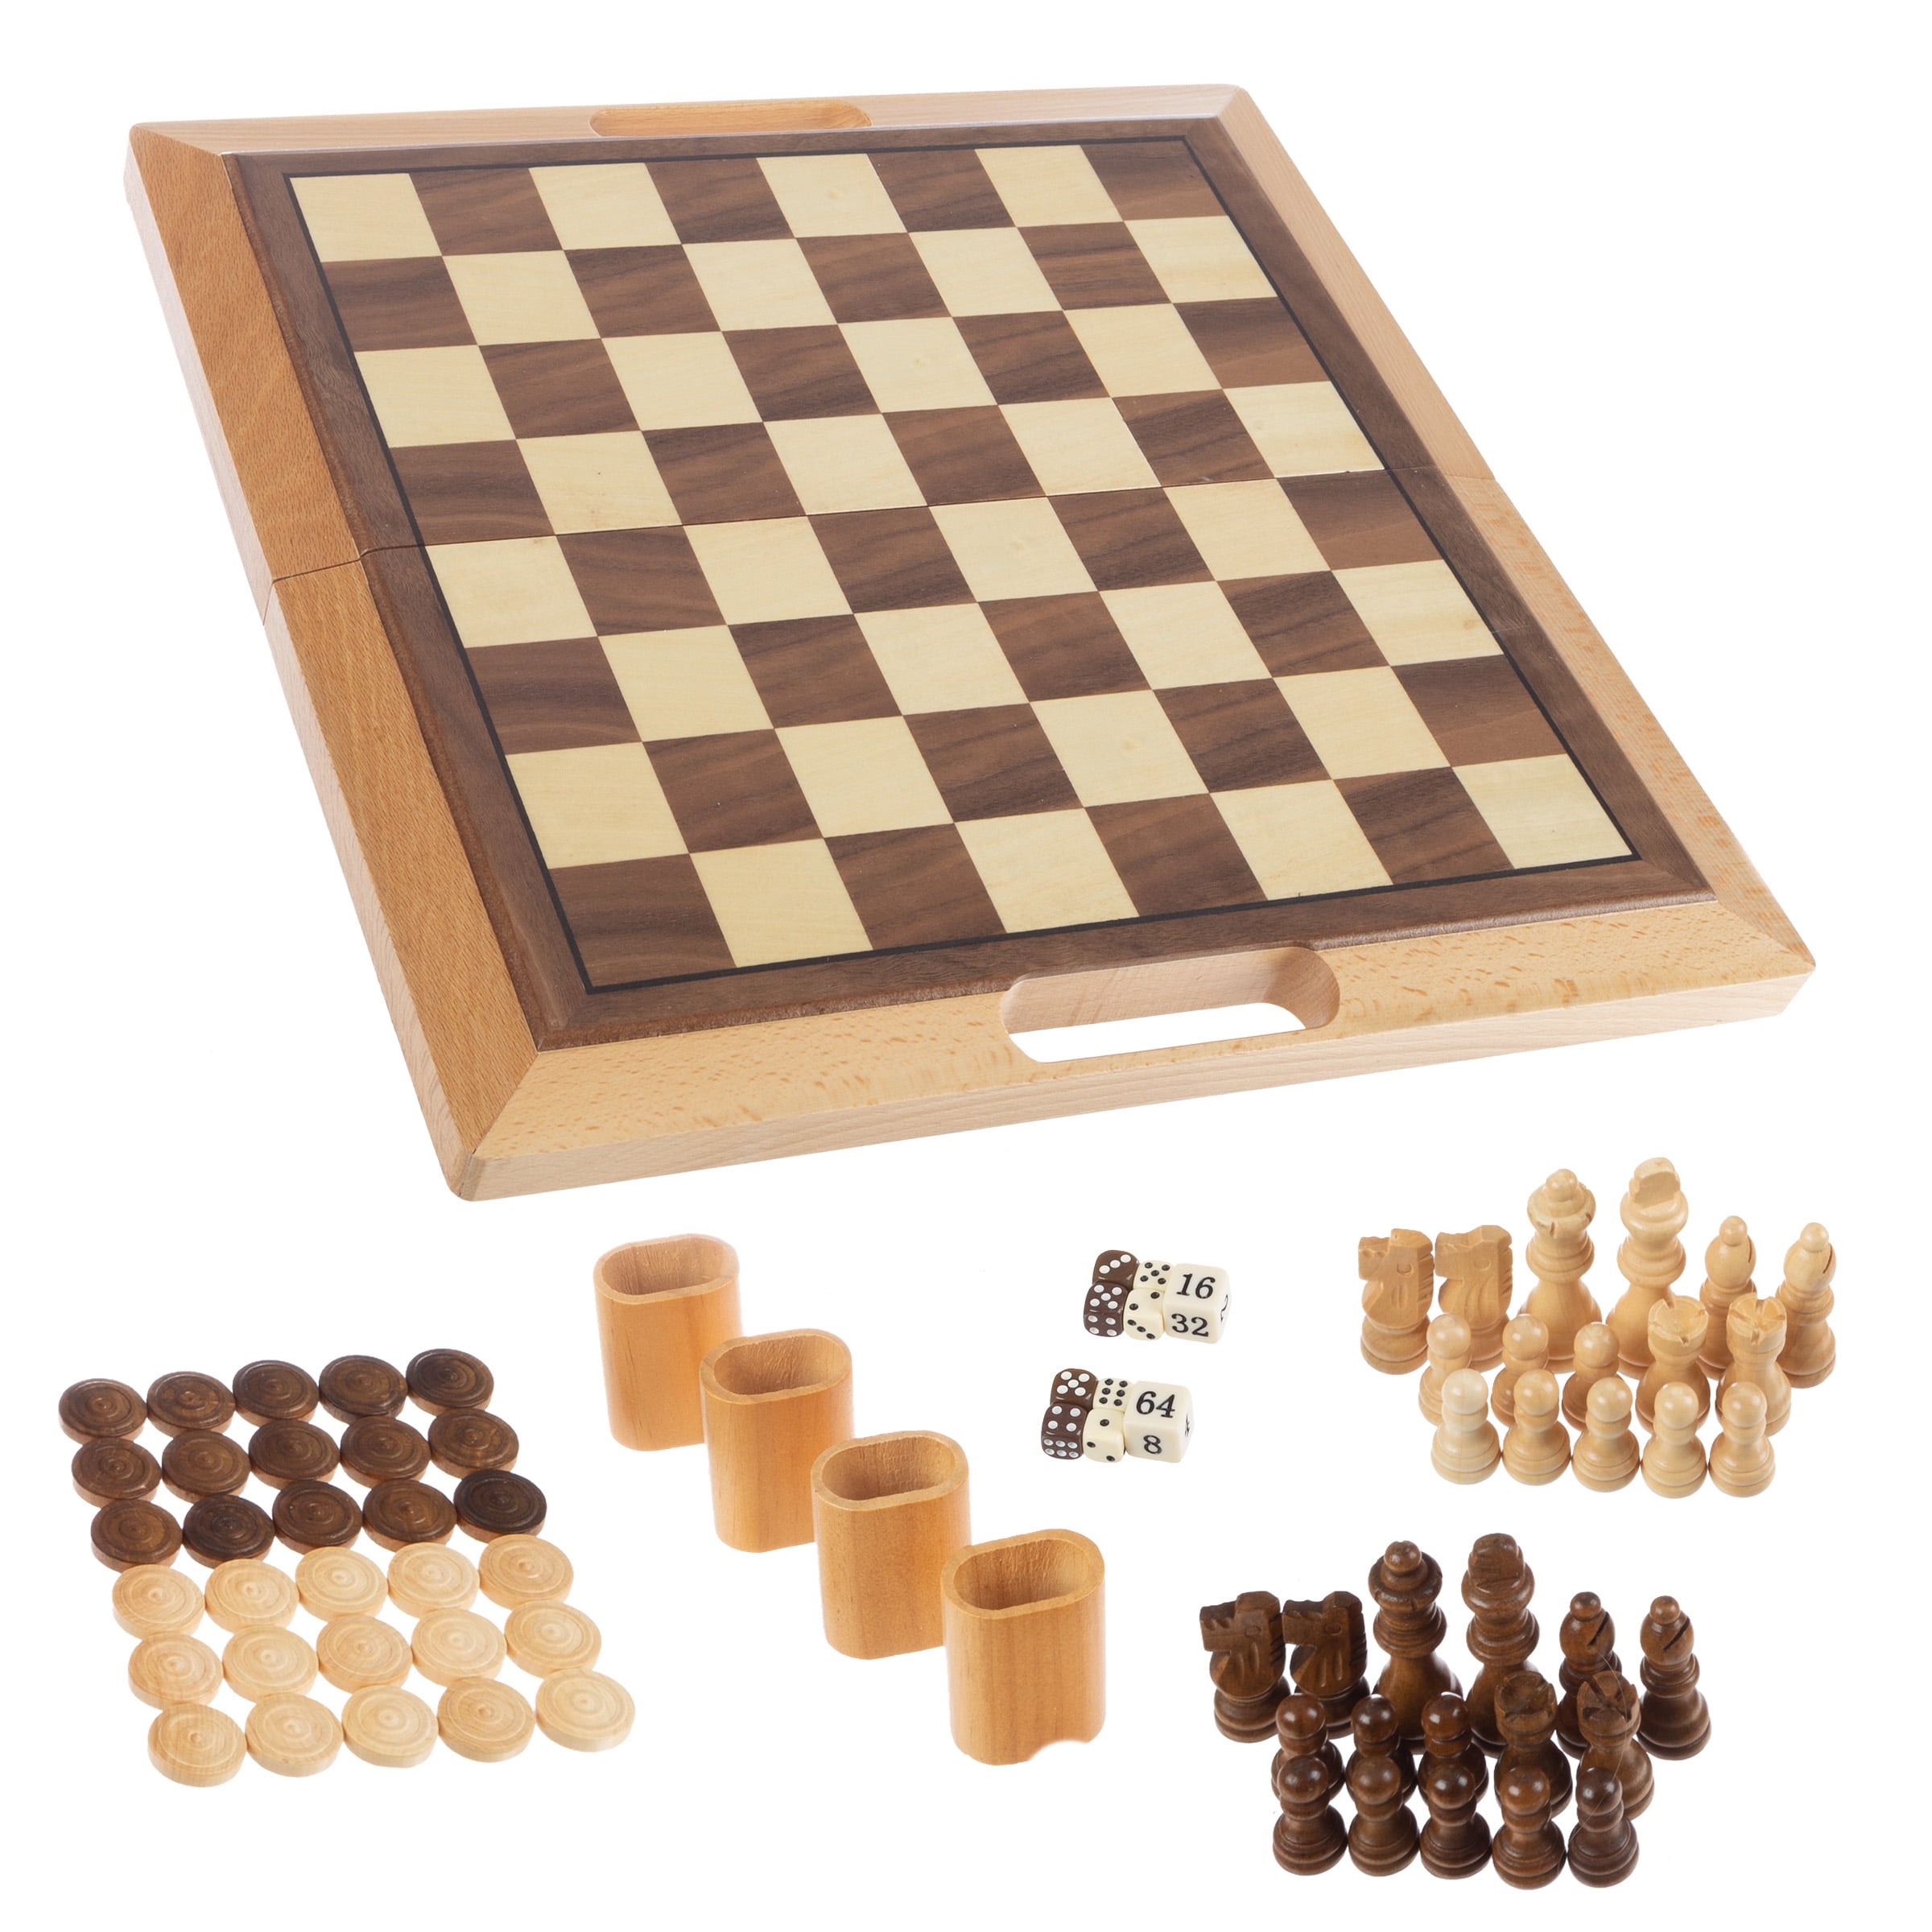 Easy To Carry 21” Limited Nice Quality Ludo Game Board Wooden Light Weight 